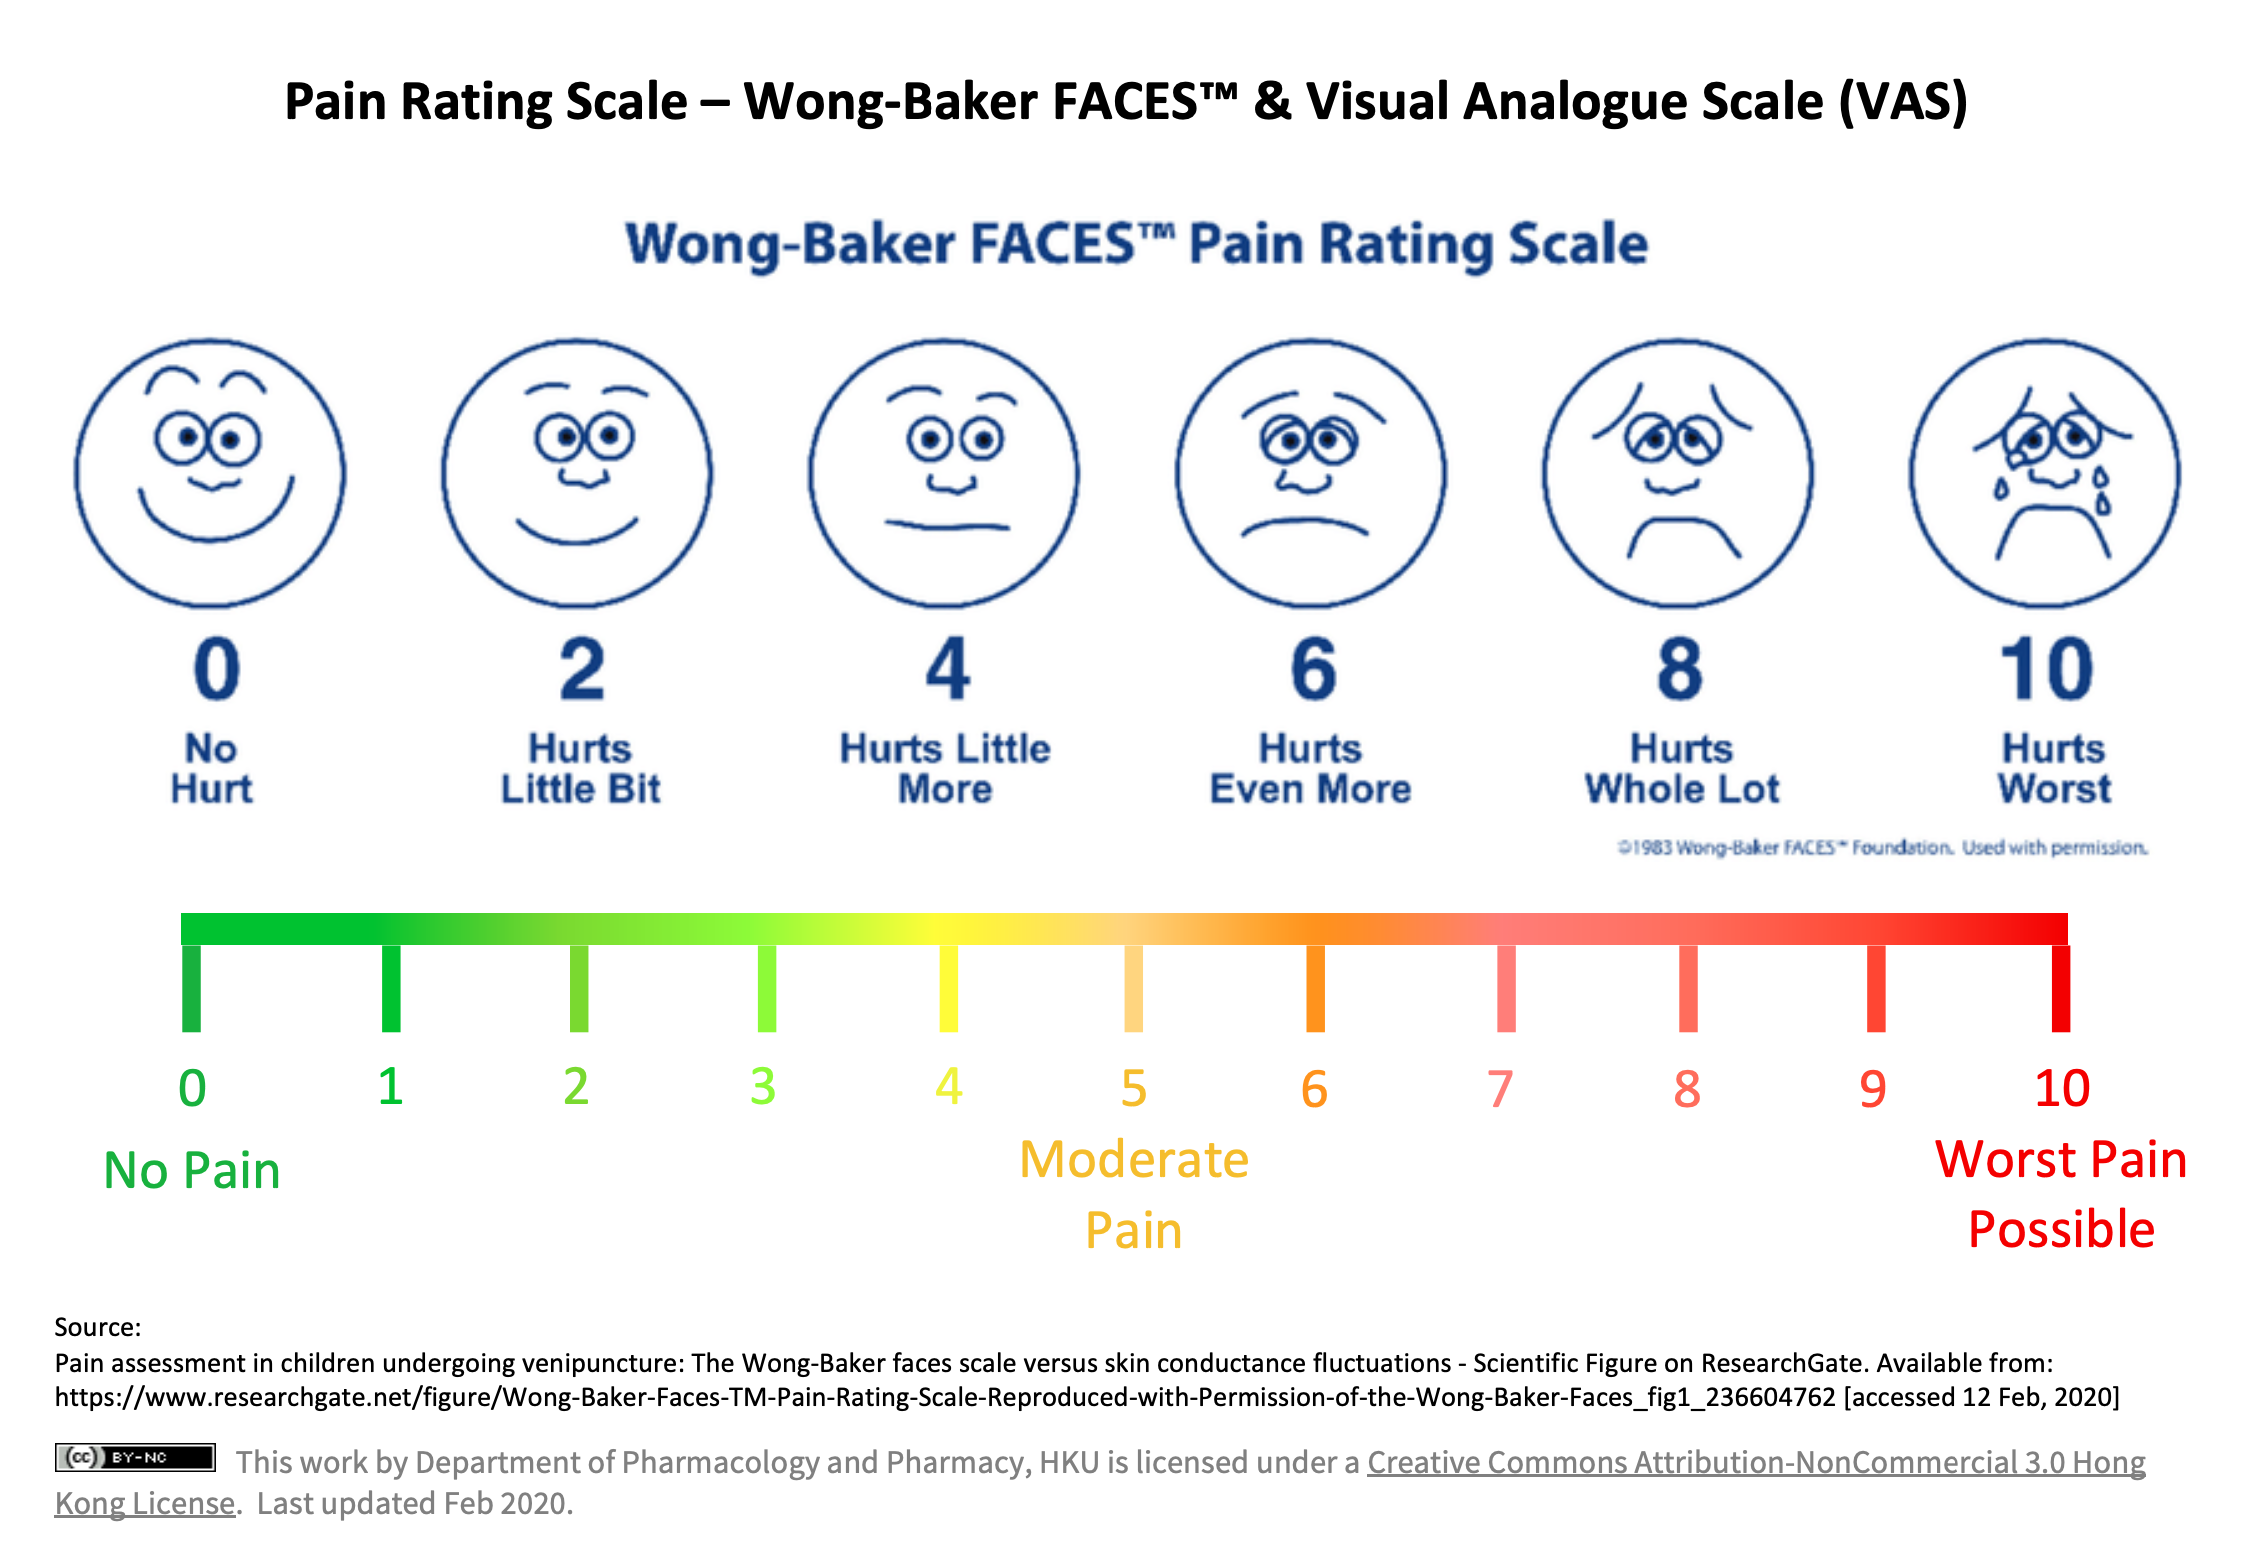 pain-rating-scale-wong-baker-face-vas-primary-care-pharmacy